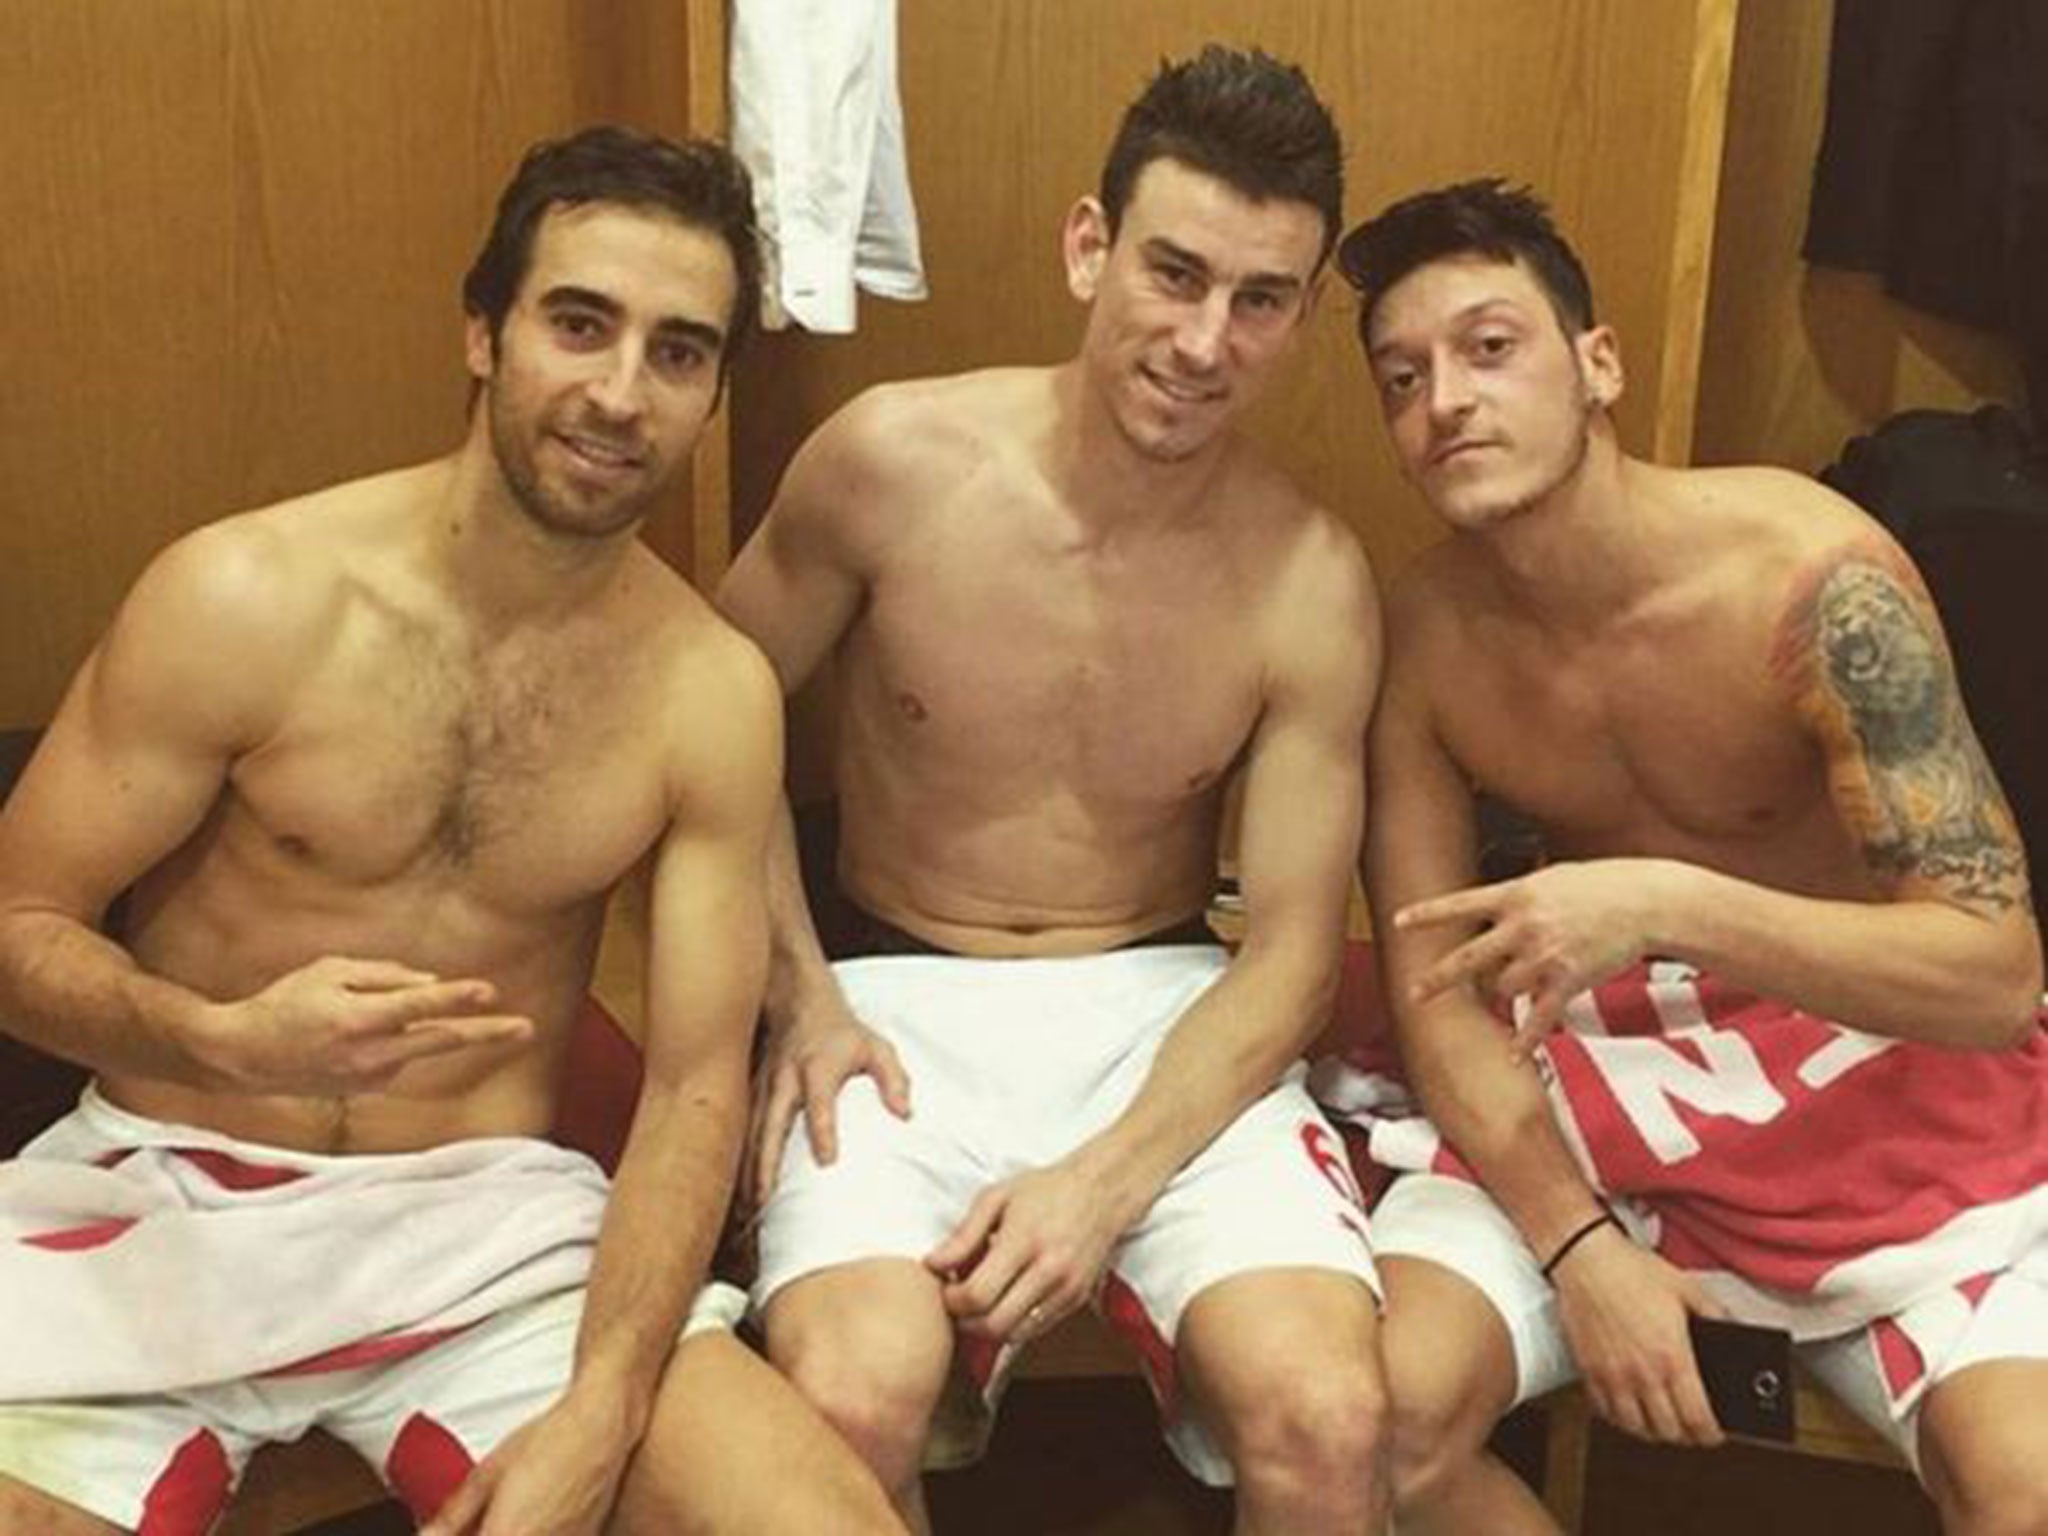 Mesut Ozil celebrates with Laurent Koscielny and Mathieu Flamini after Arsenal's win over Manchester City